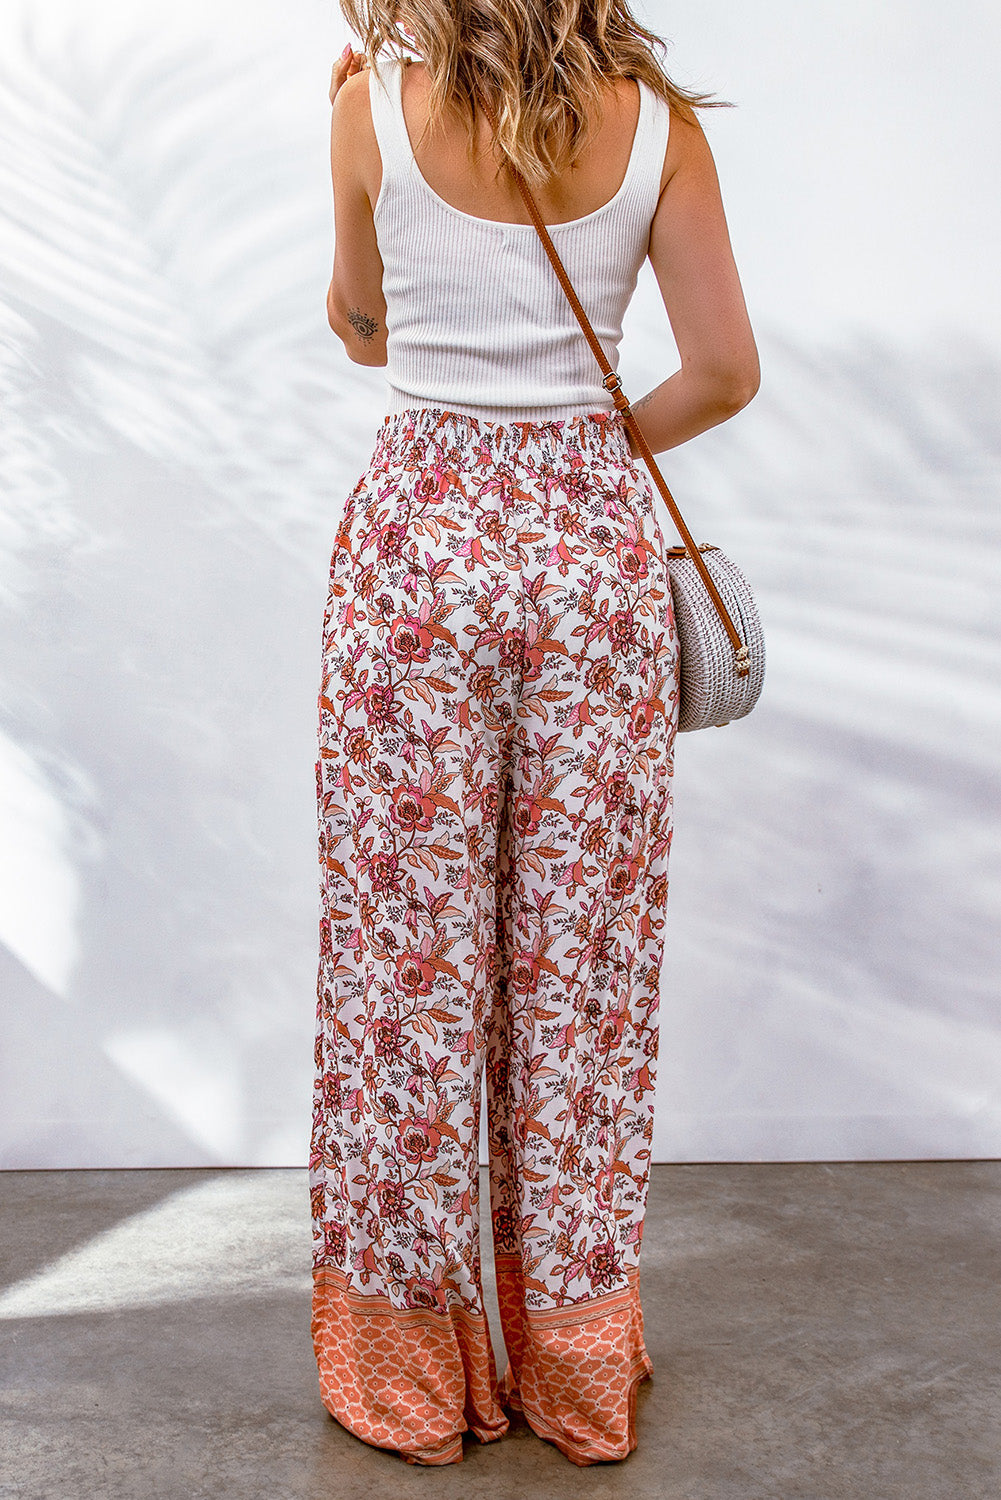 Lightweight and flowy floral print palazzo pants with contrasting hem patterns